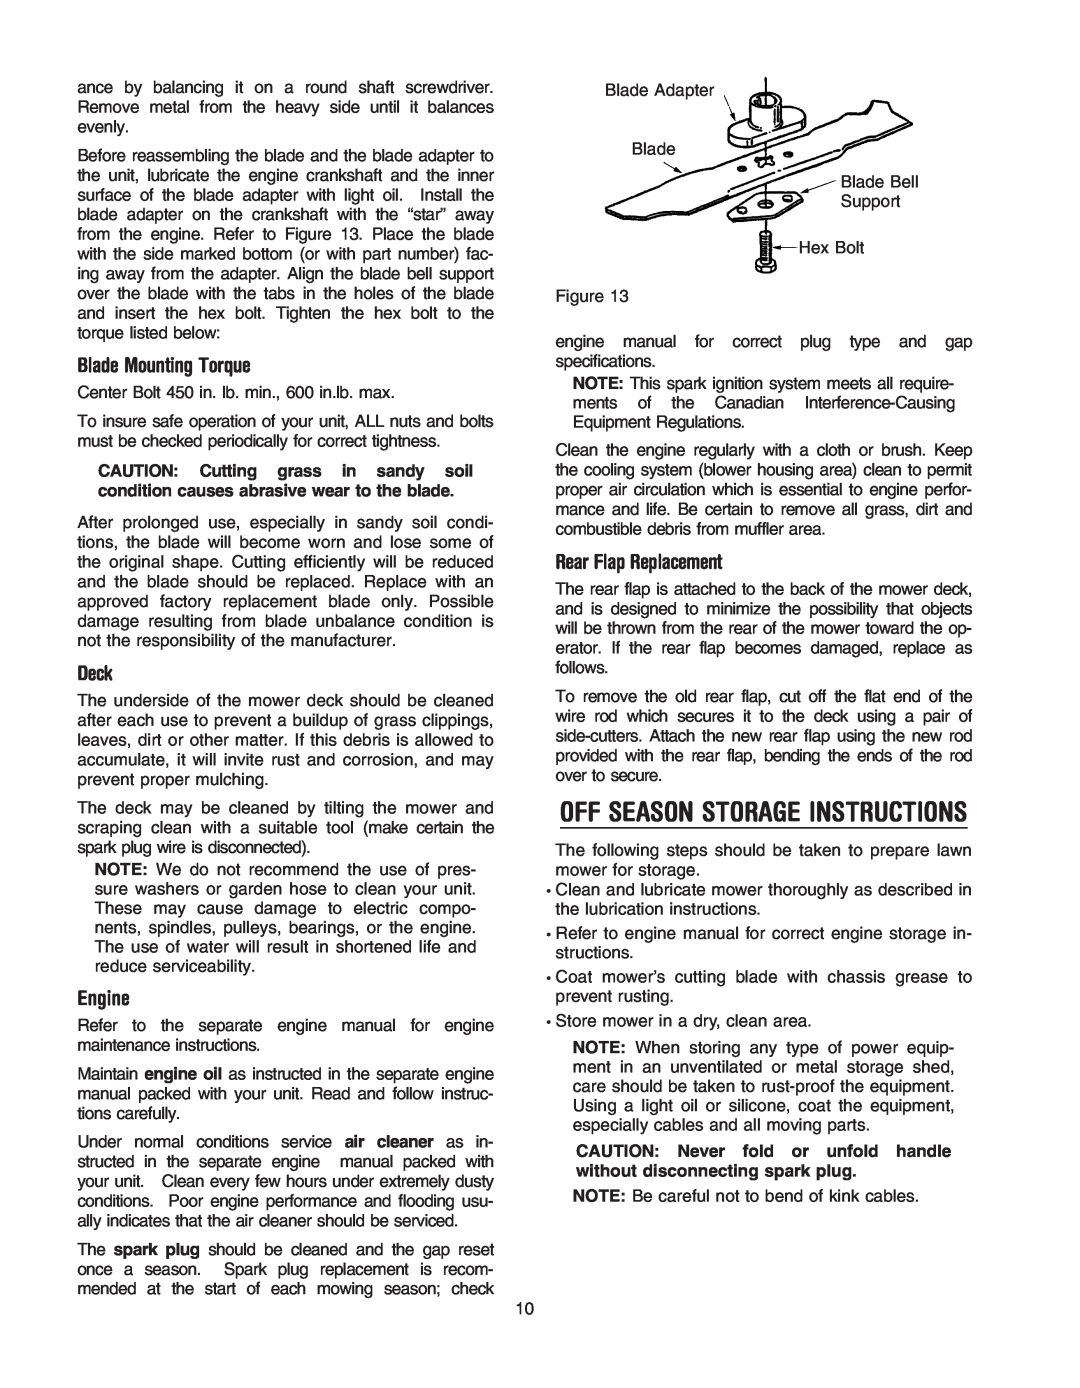 Troy-Bilt 400 Series manual Off Season Storage Instructions, Blade Mounting Torque, Deck, Engine, Rear Flap Replacement 